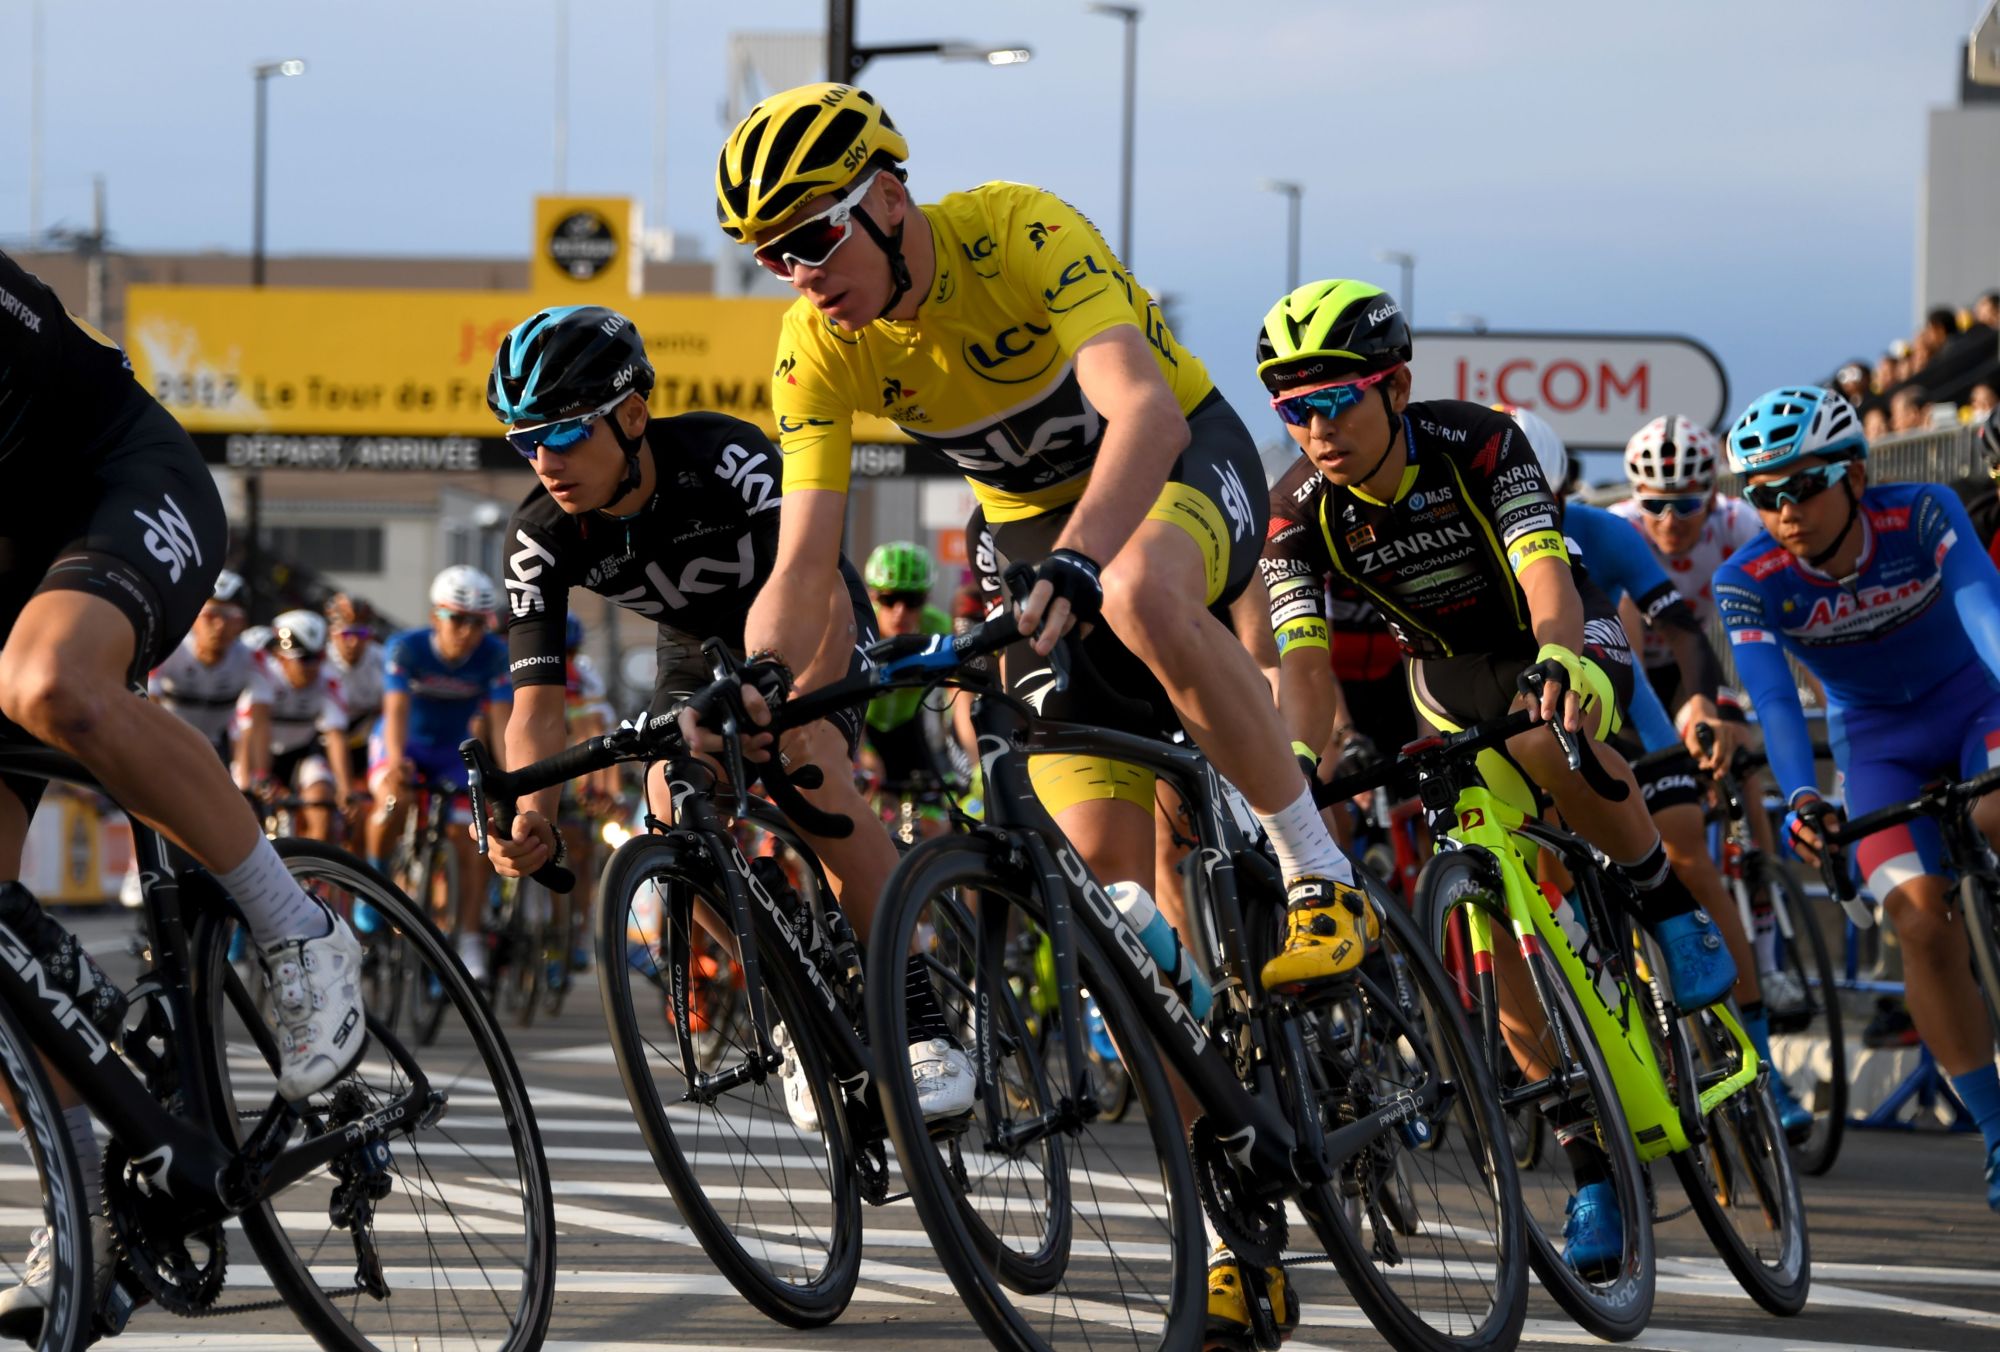 Britain's Chris Froome competes in the Saitama Criterium road race on Saturday. | AFP-JIJI